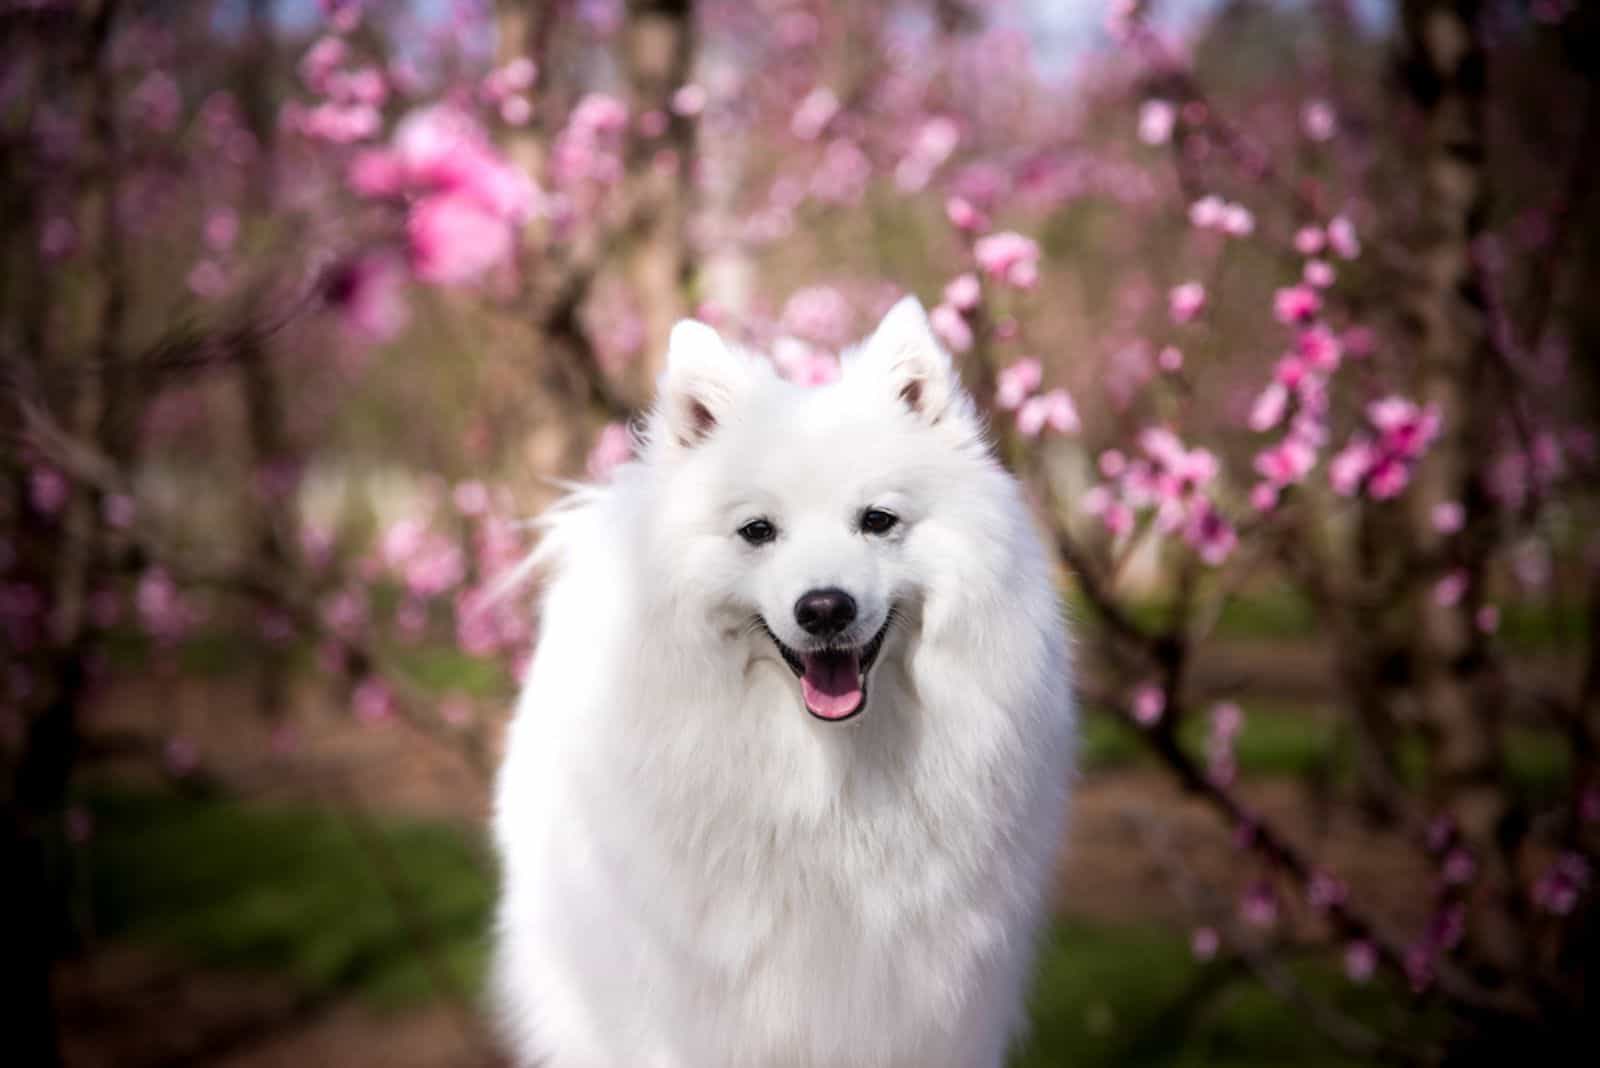 A white Japanese Spitz dog standing among flowers